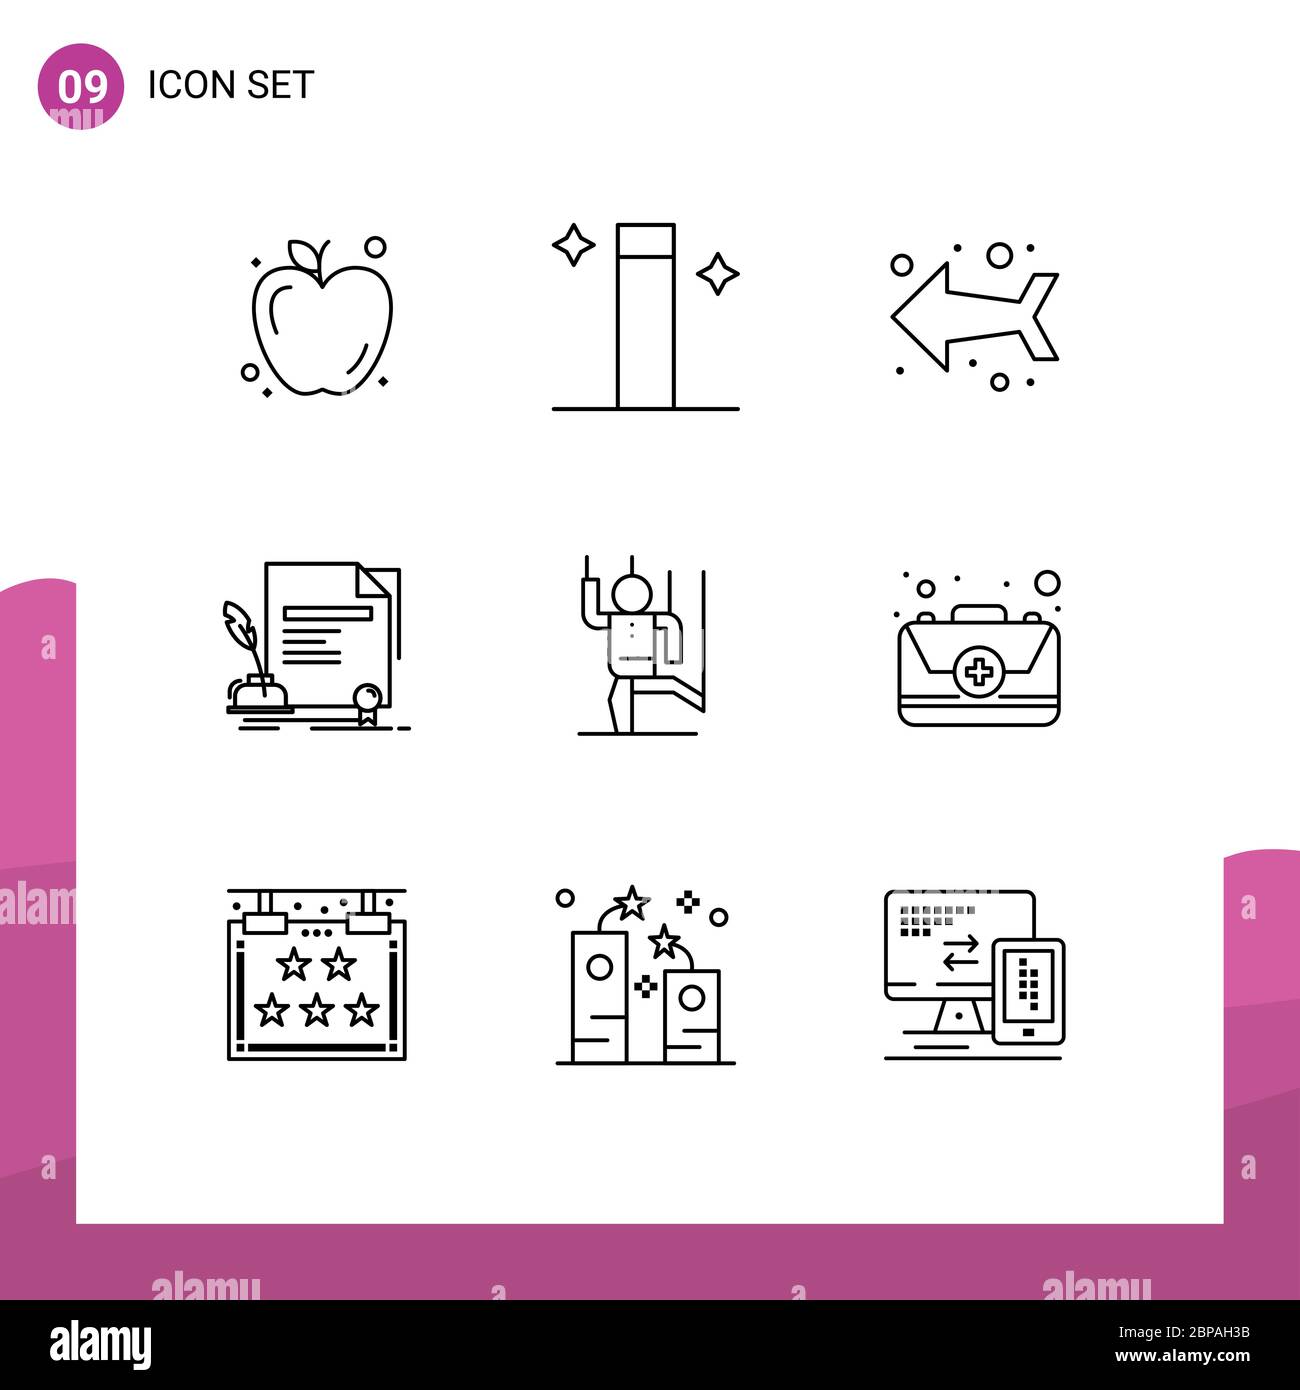 Universal Icon Symbols Group of 9 Modern Outlines of manipulate, control, direction, command, agreement Editable Vector Design Elements Stock Vector